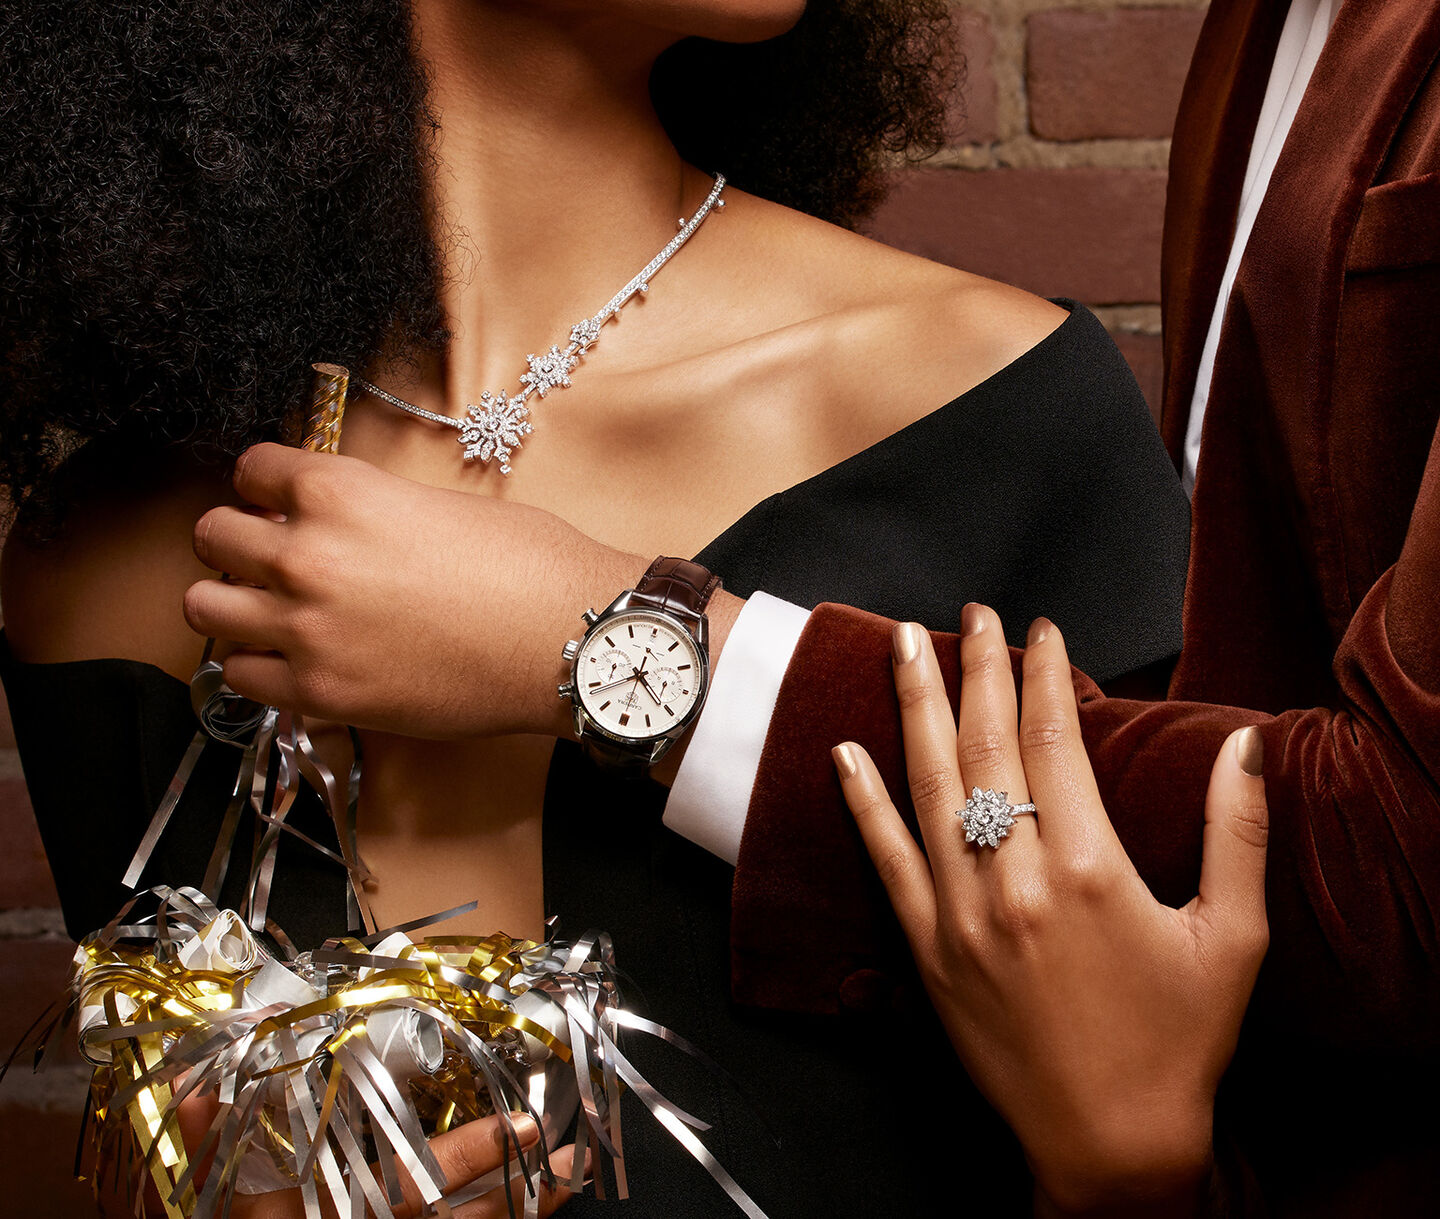 A man and woman dressed for the holiday season in Maison Birks jewellery and watches.